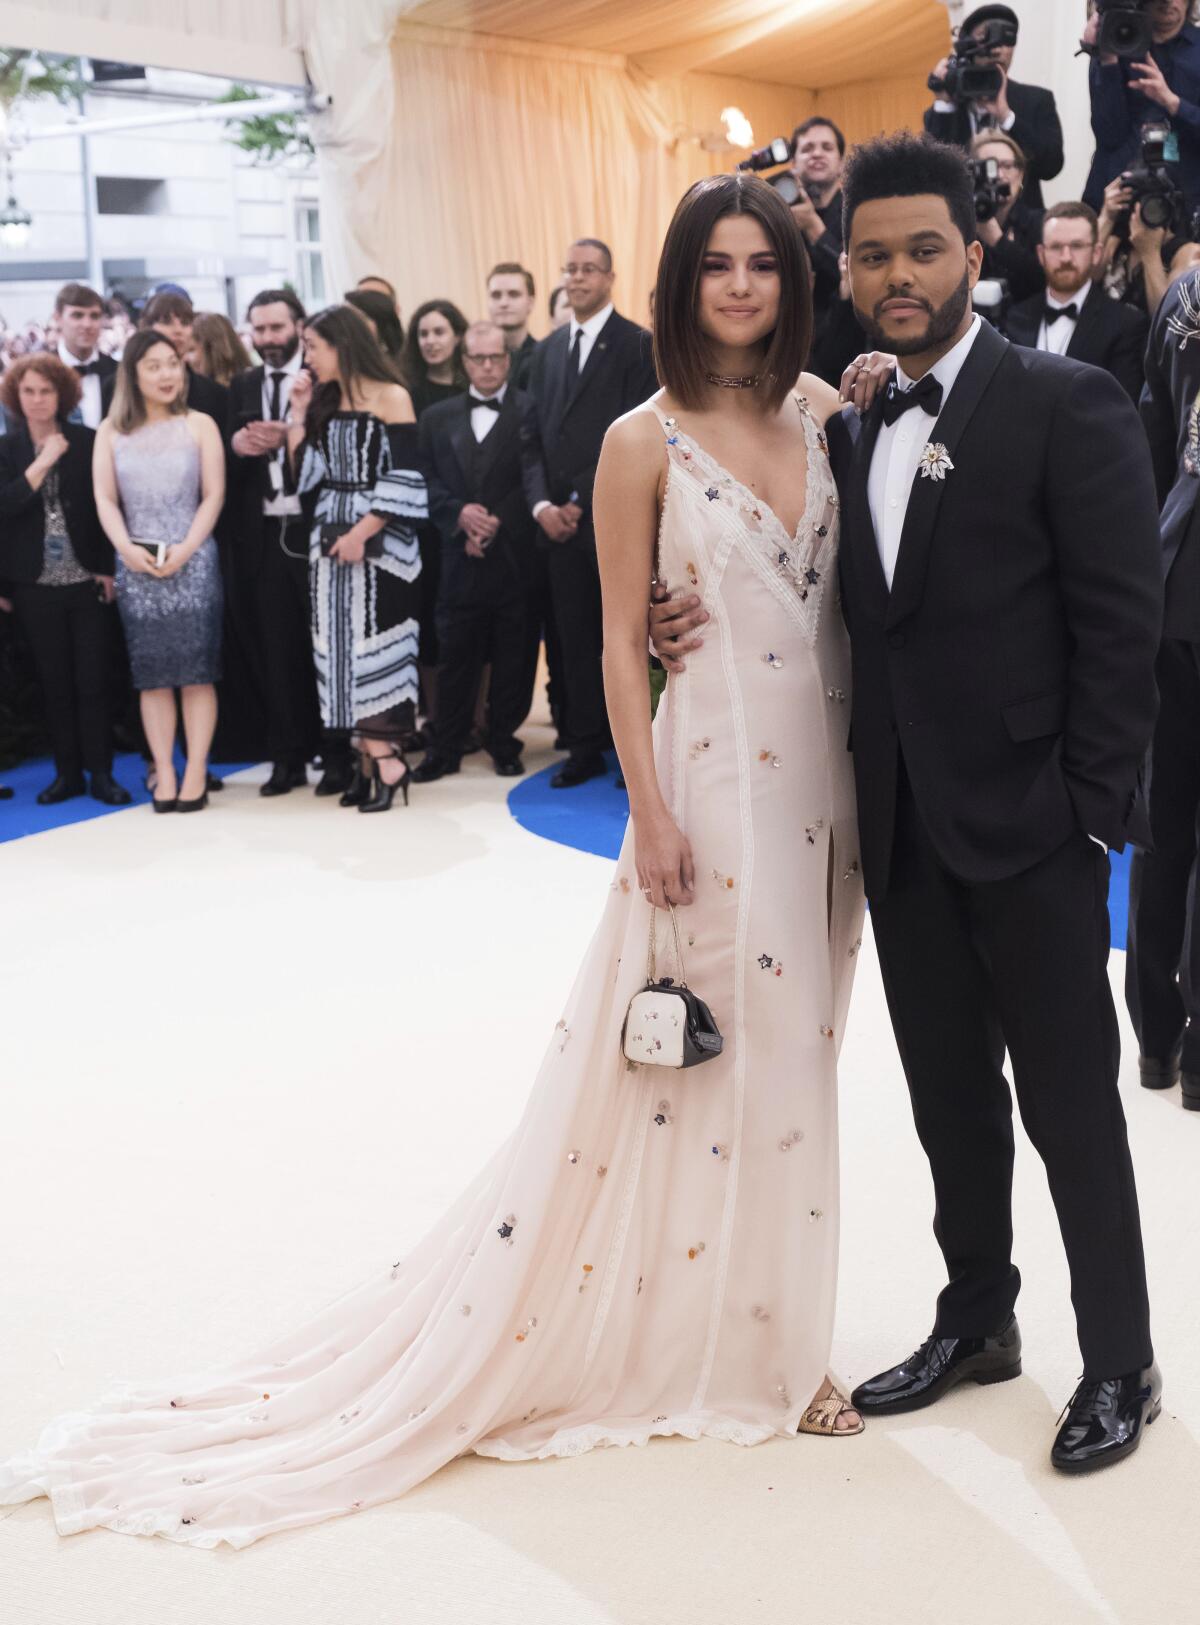 Selena Gomez and the Weeknd pose in a gown and a tuxedo in front of guests at a gala